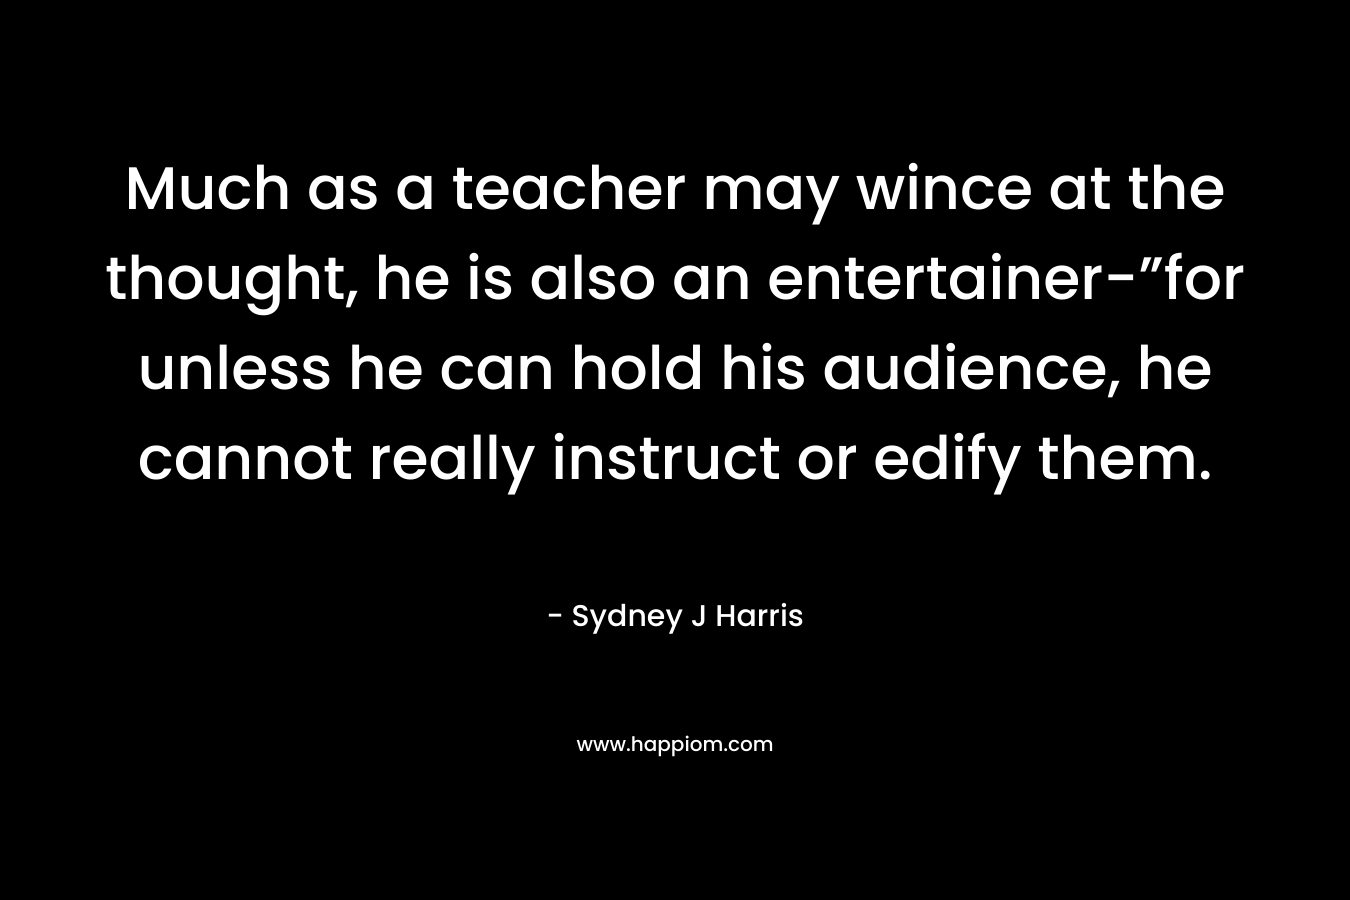 Much as a teacher may wince at the thought, he is also an entertainer-”for unless he can hold his audience, he cannot really instruct or edify them.